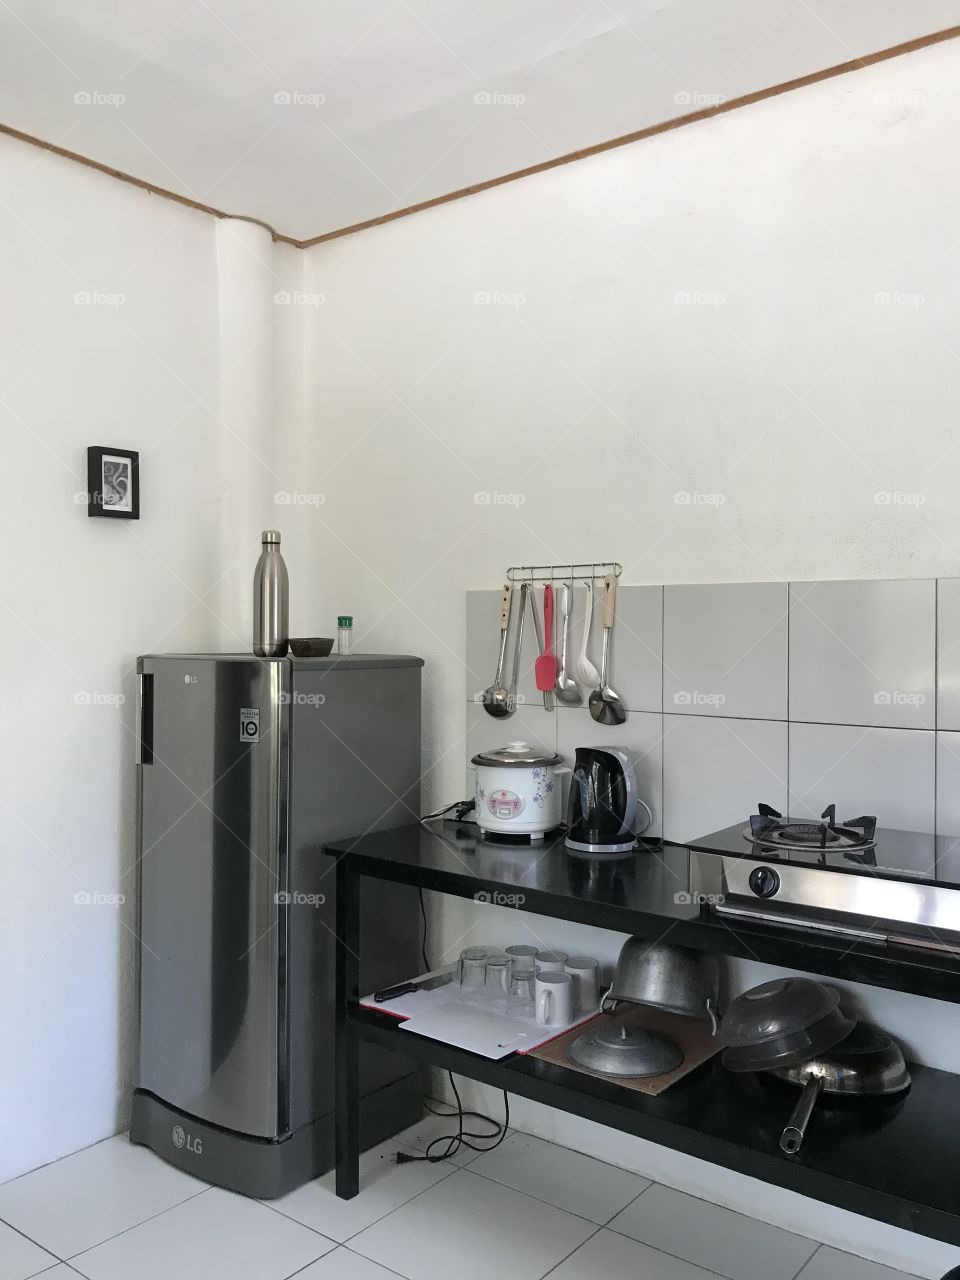 Simple kitchenette with refrigerator